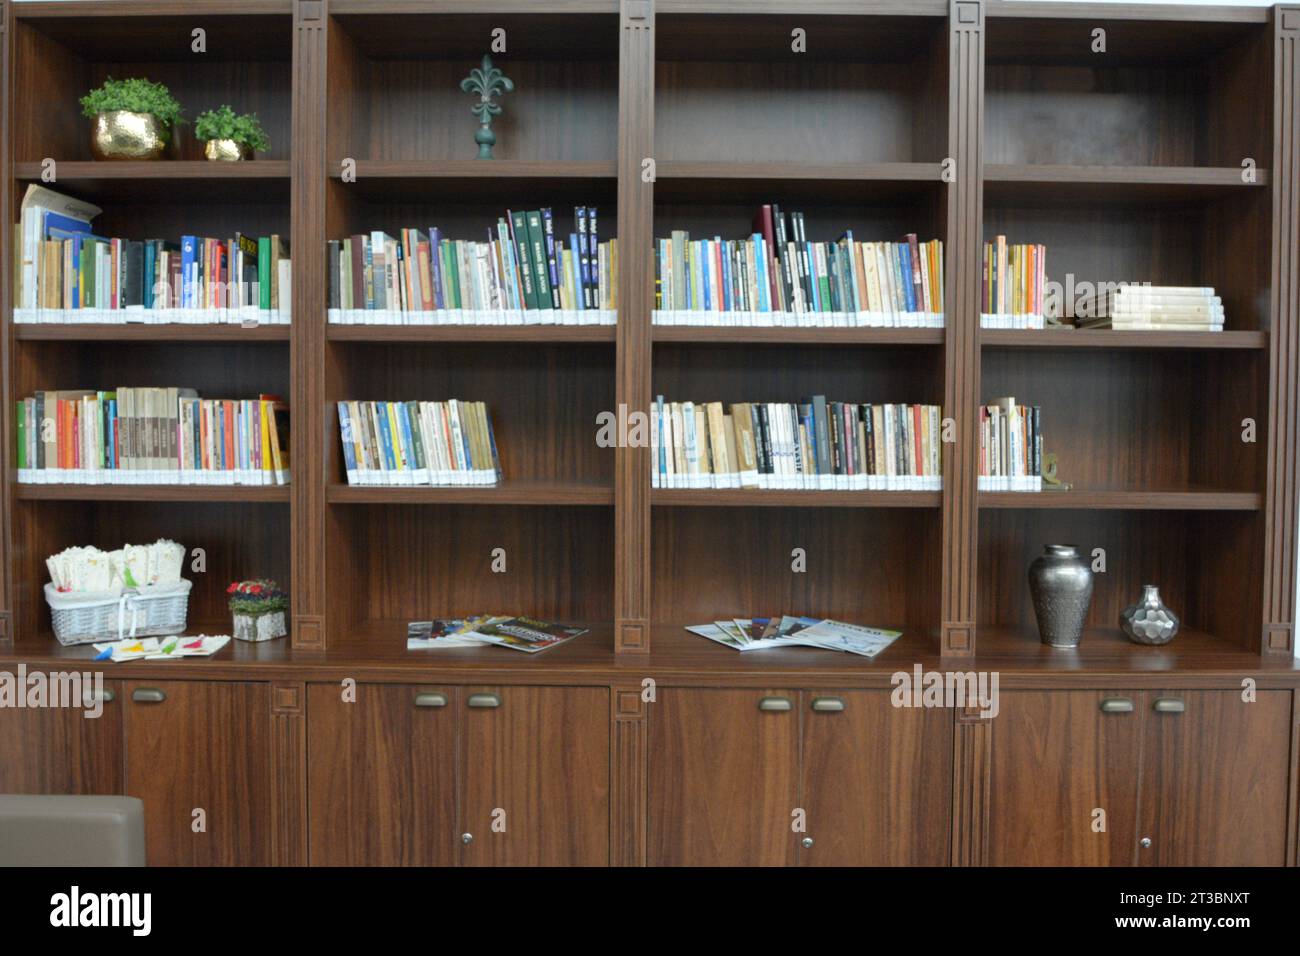 Wooden bookcase with placed books and decorative material. vases and plants Stock Photo